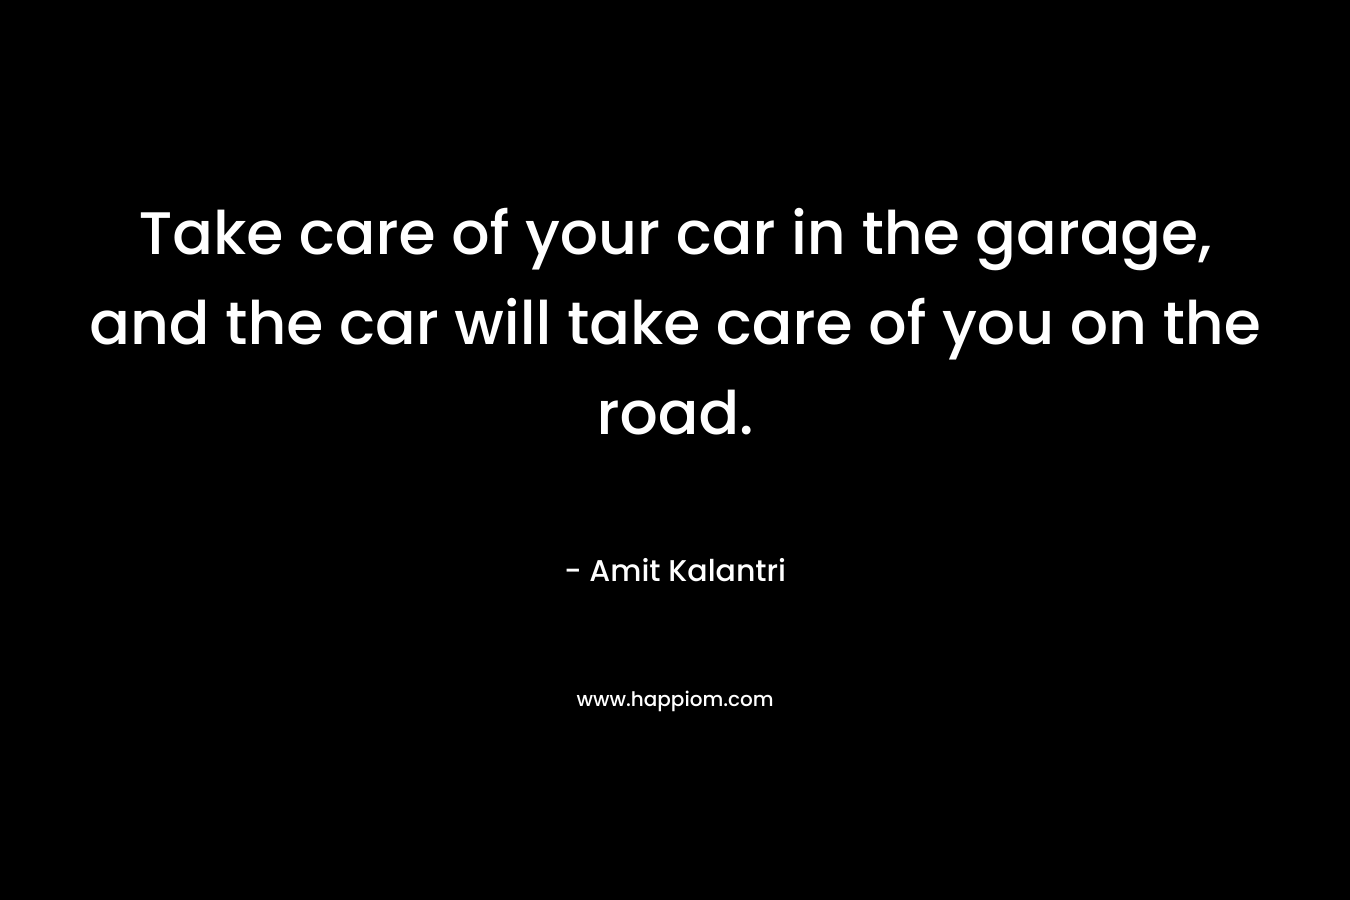 Take care of your car in the garage, and the car will take care of you on the road.